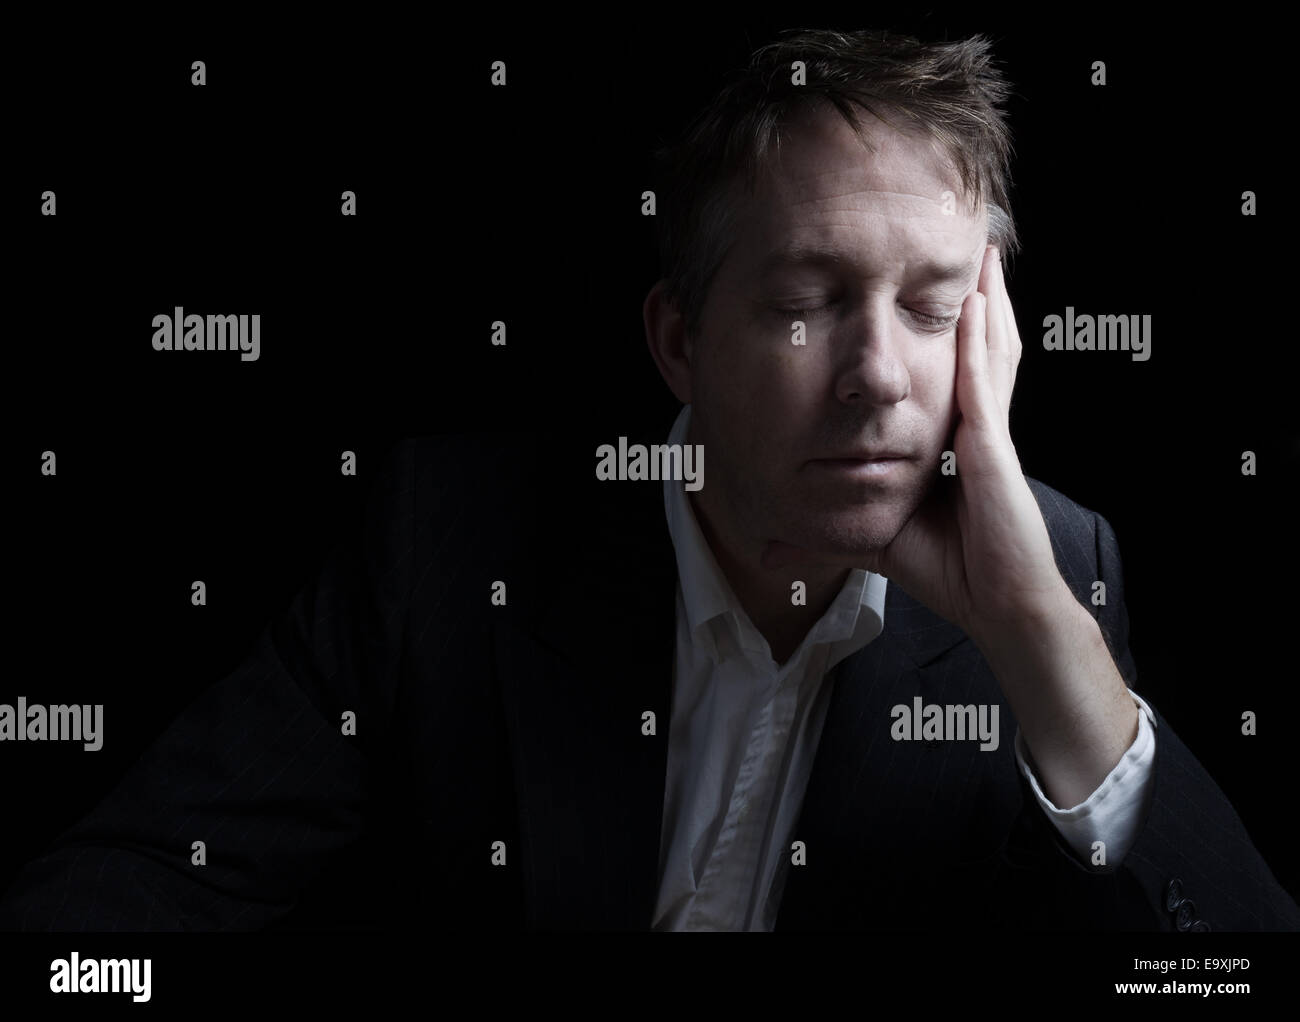 Portrait of businessman closing eyes while working late at night on black background with copy space Stock Photo